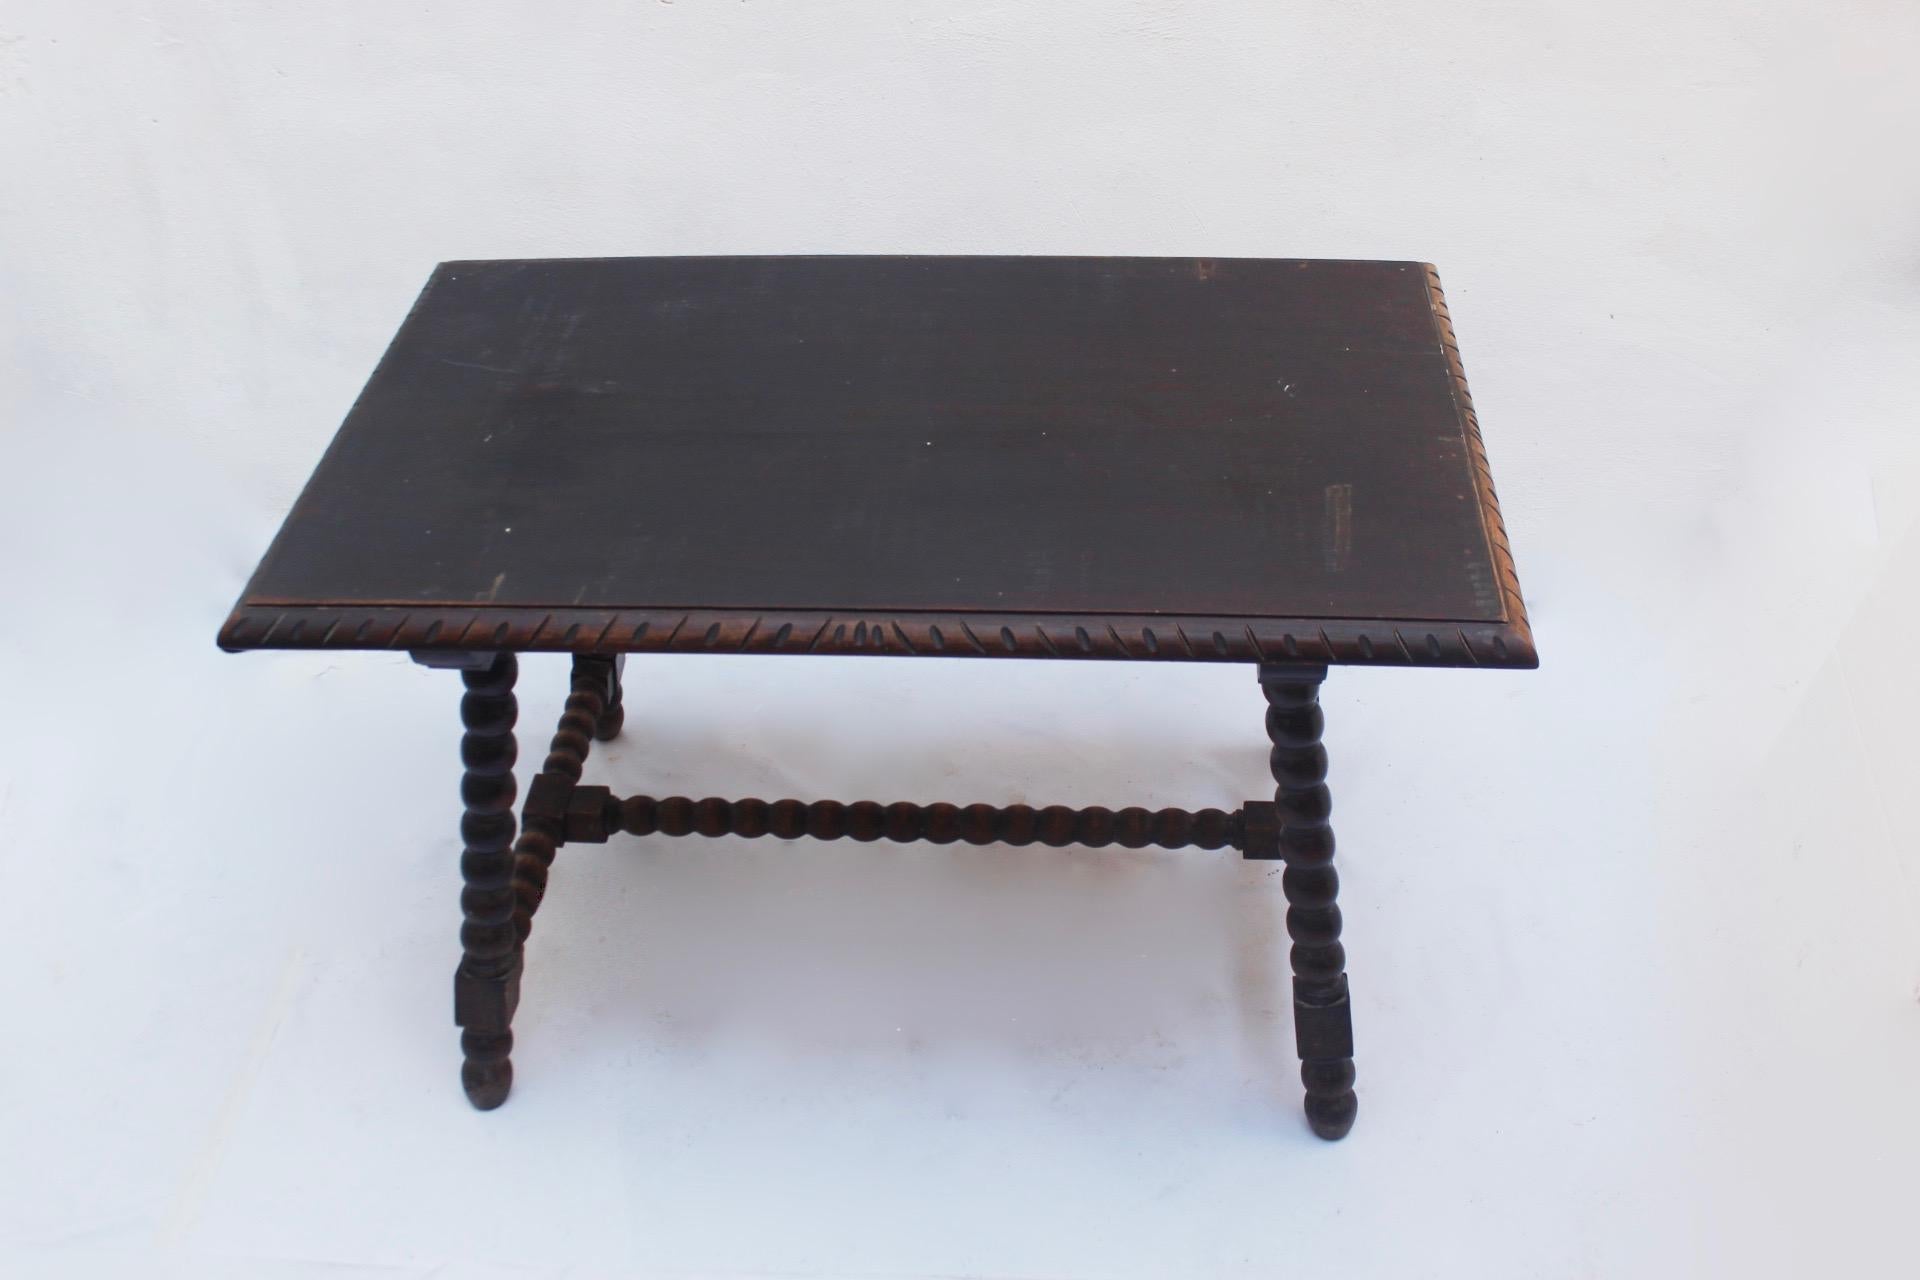 Spanish Baroque Revival Wood Dining Table Made in Spain, 19th Century